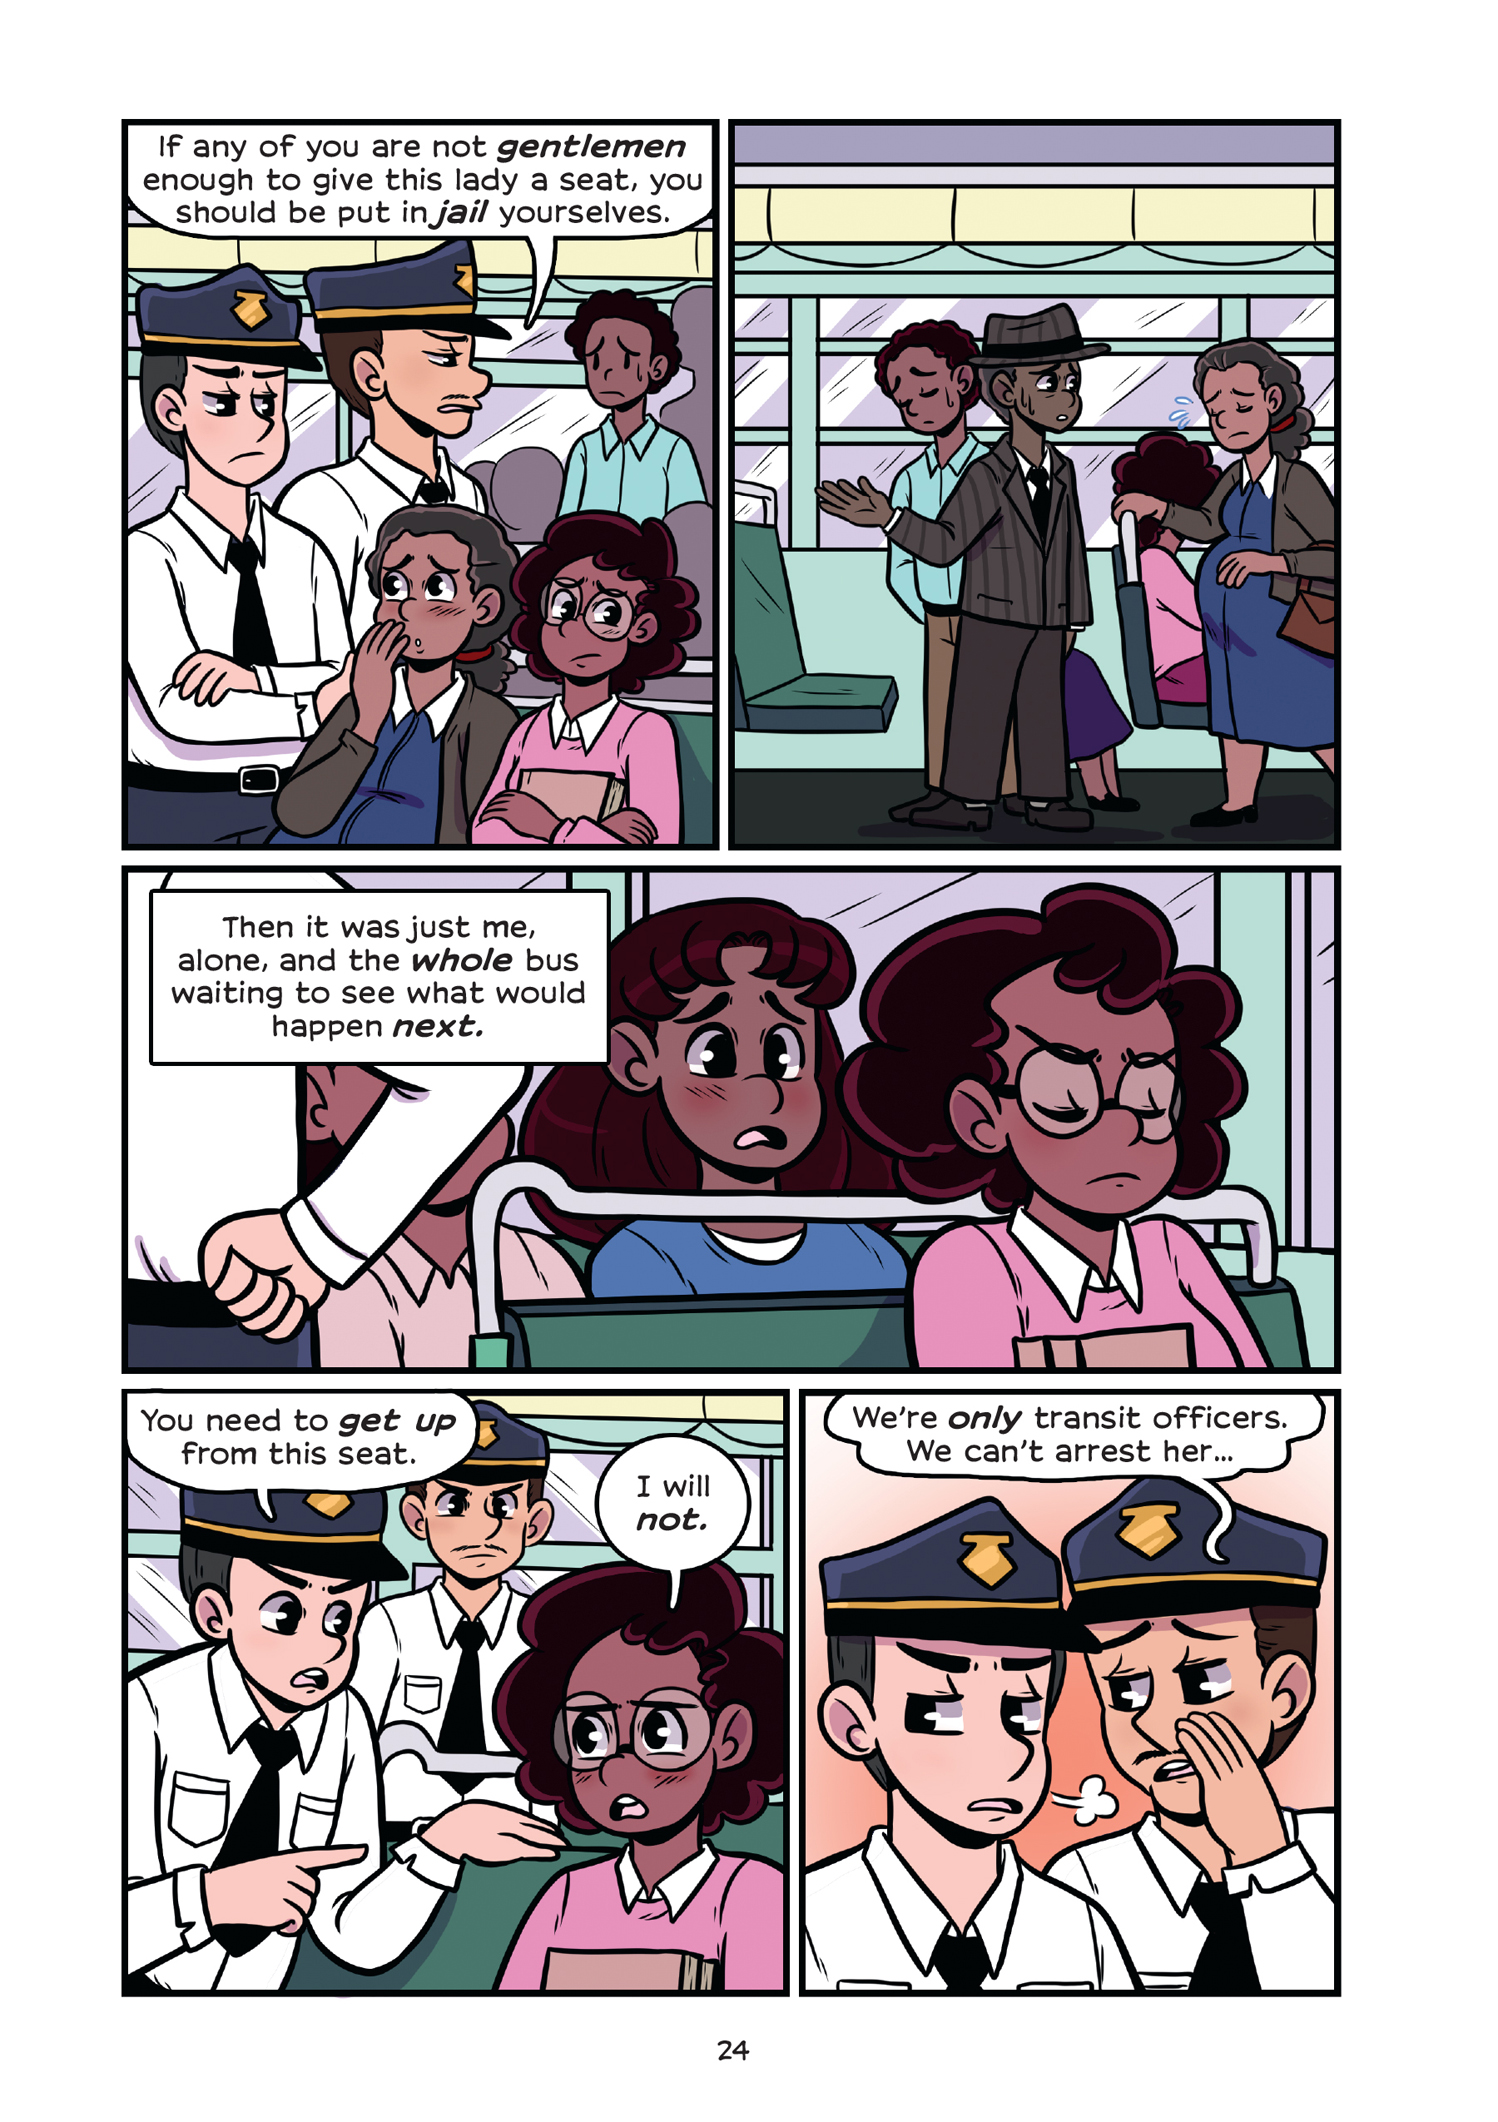 Read online History Comics comic -  Issue # Rosa Parks & Claudette Colvin - Civil Rights Heroes - 30